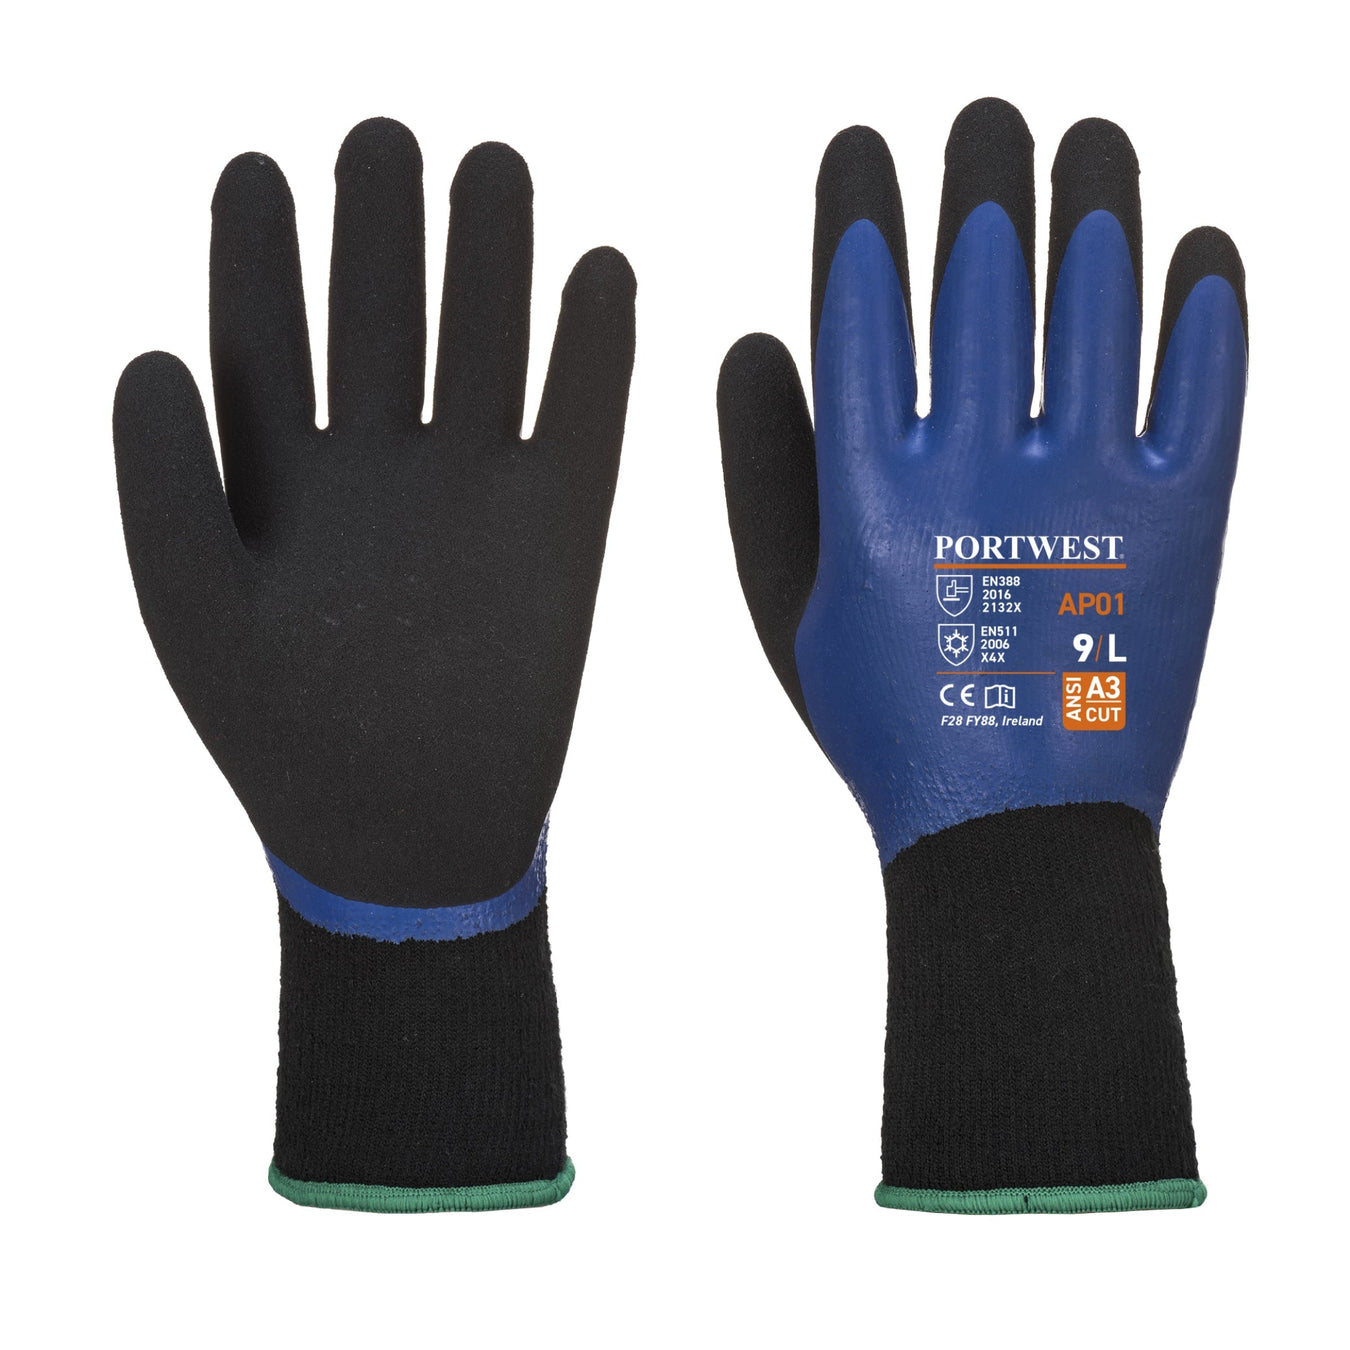 Insulated Cut Gloves